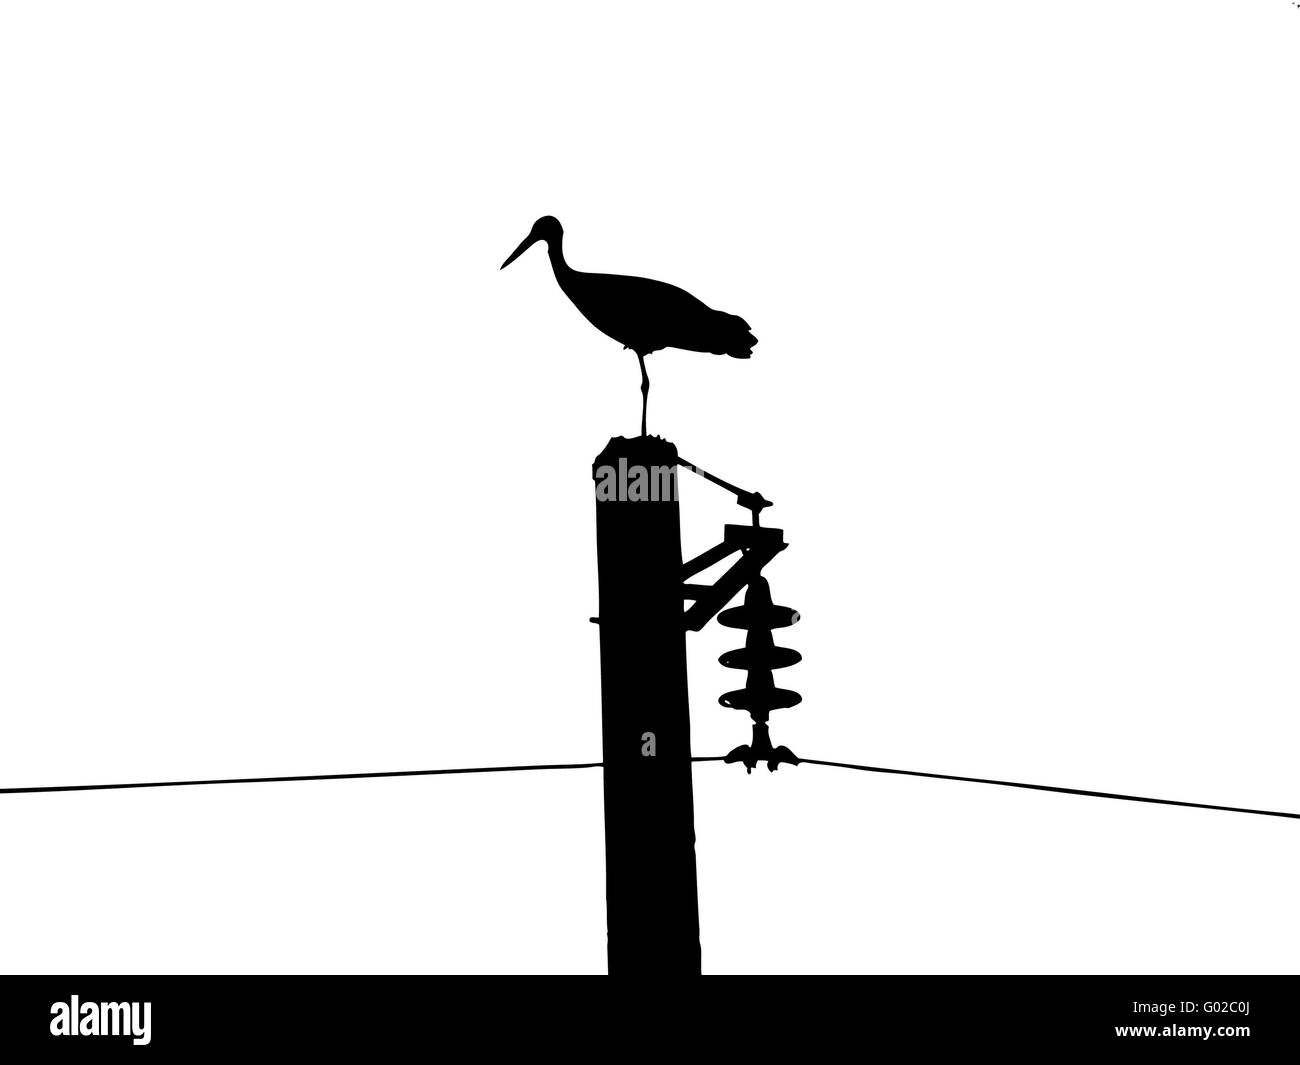 vector silhouette of the crane on electric pole Stock Photo